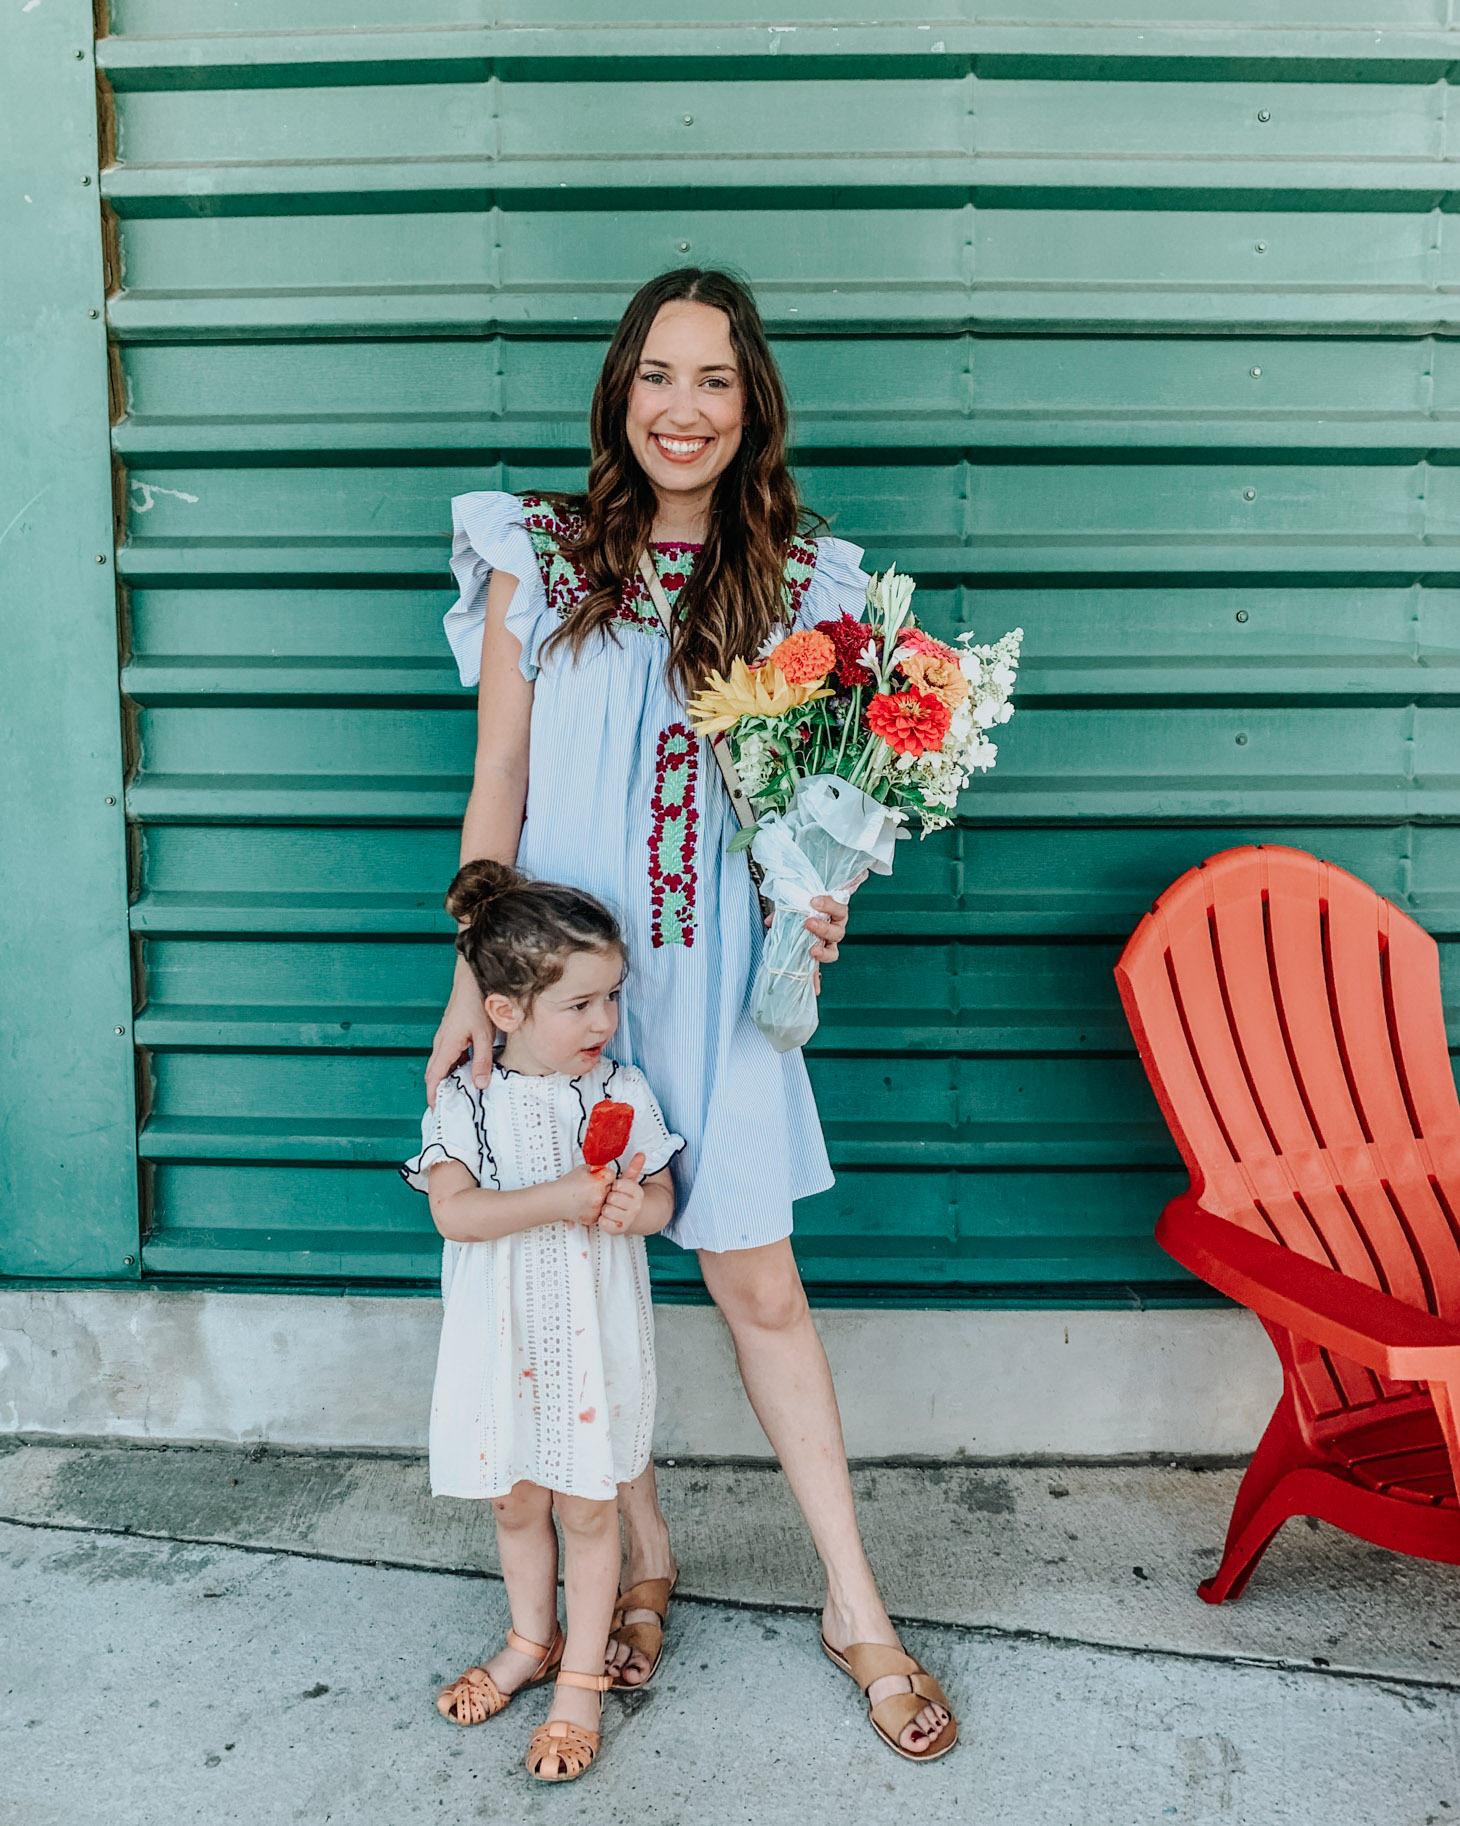 5 Dress Designers to Take Note Of this Summer by popular Memphis fashion blog, Lone Star Looking Glass: image of a woman wearing a Mi Golondrina floral embroidered dress and standing in front of a green industrial wall with her daughter who is wearing a white eyelet dress and eating a red popsicle. 